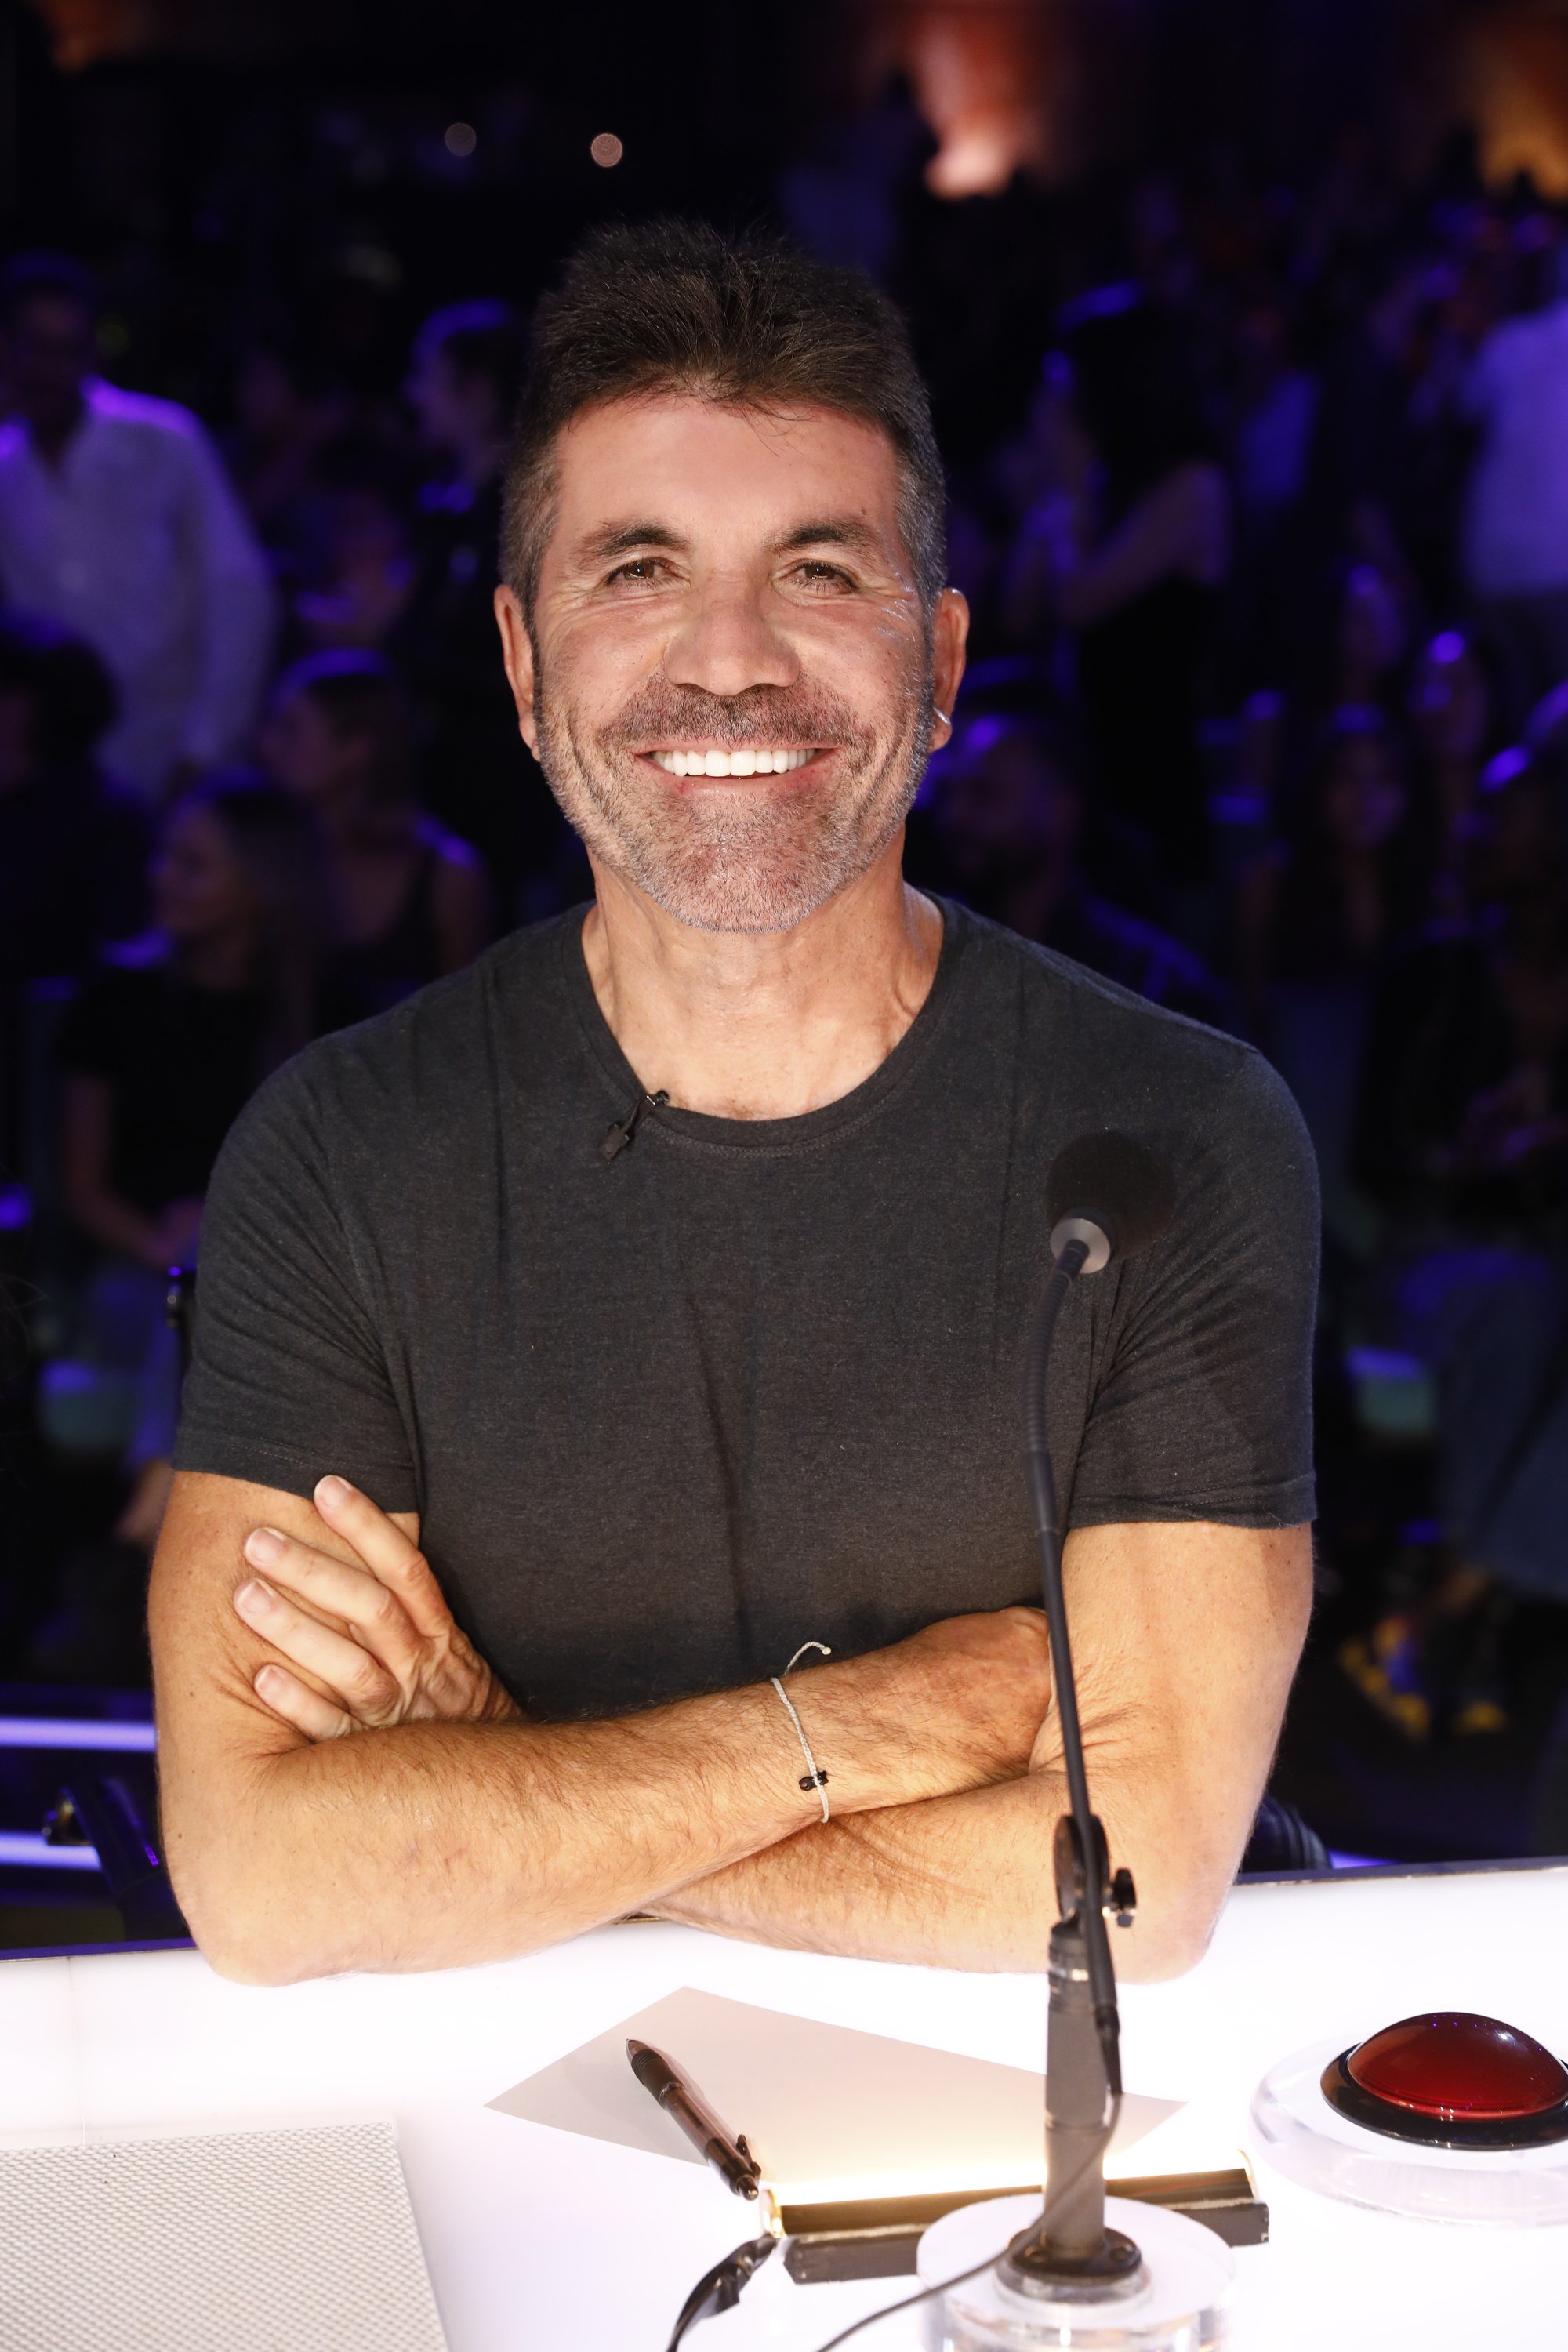 Simon Cowell on season 17 of "Americas Got Talent" Quarterfinals results episode on August 10, 2022. | Source: Getty Images